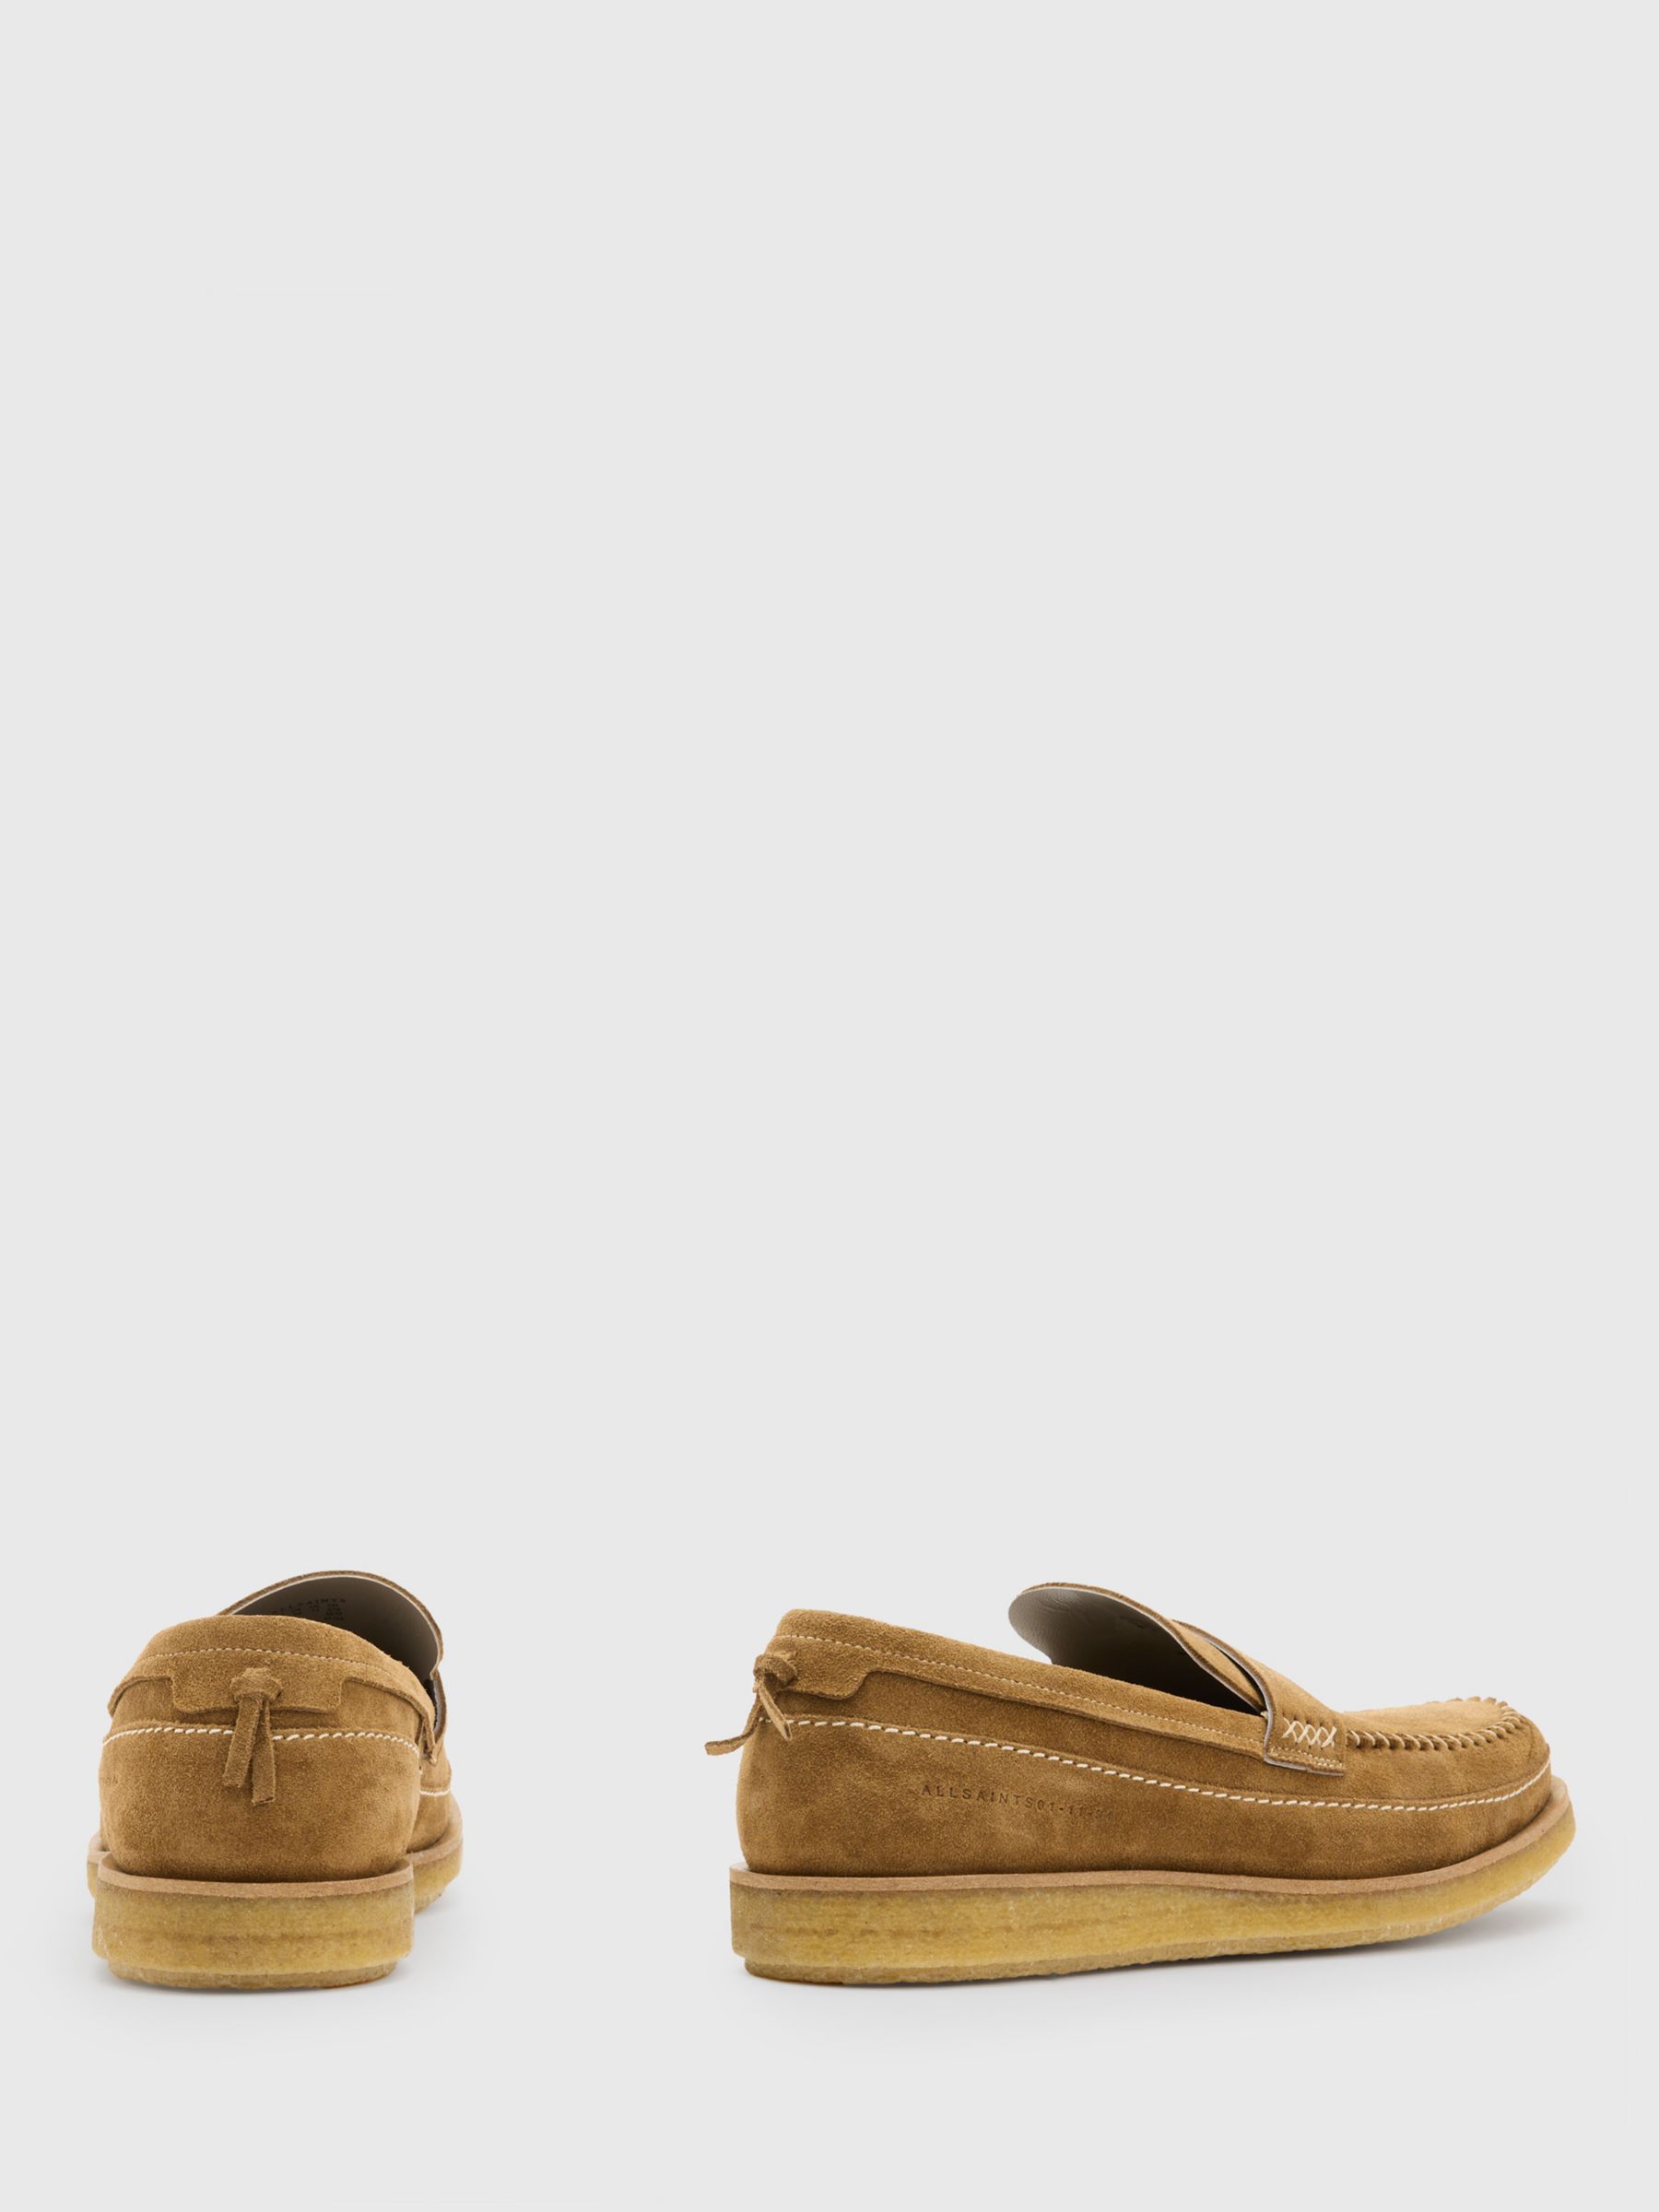 AllSaints Jago Leather Loafers, Tan, 10